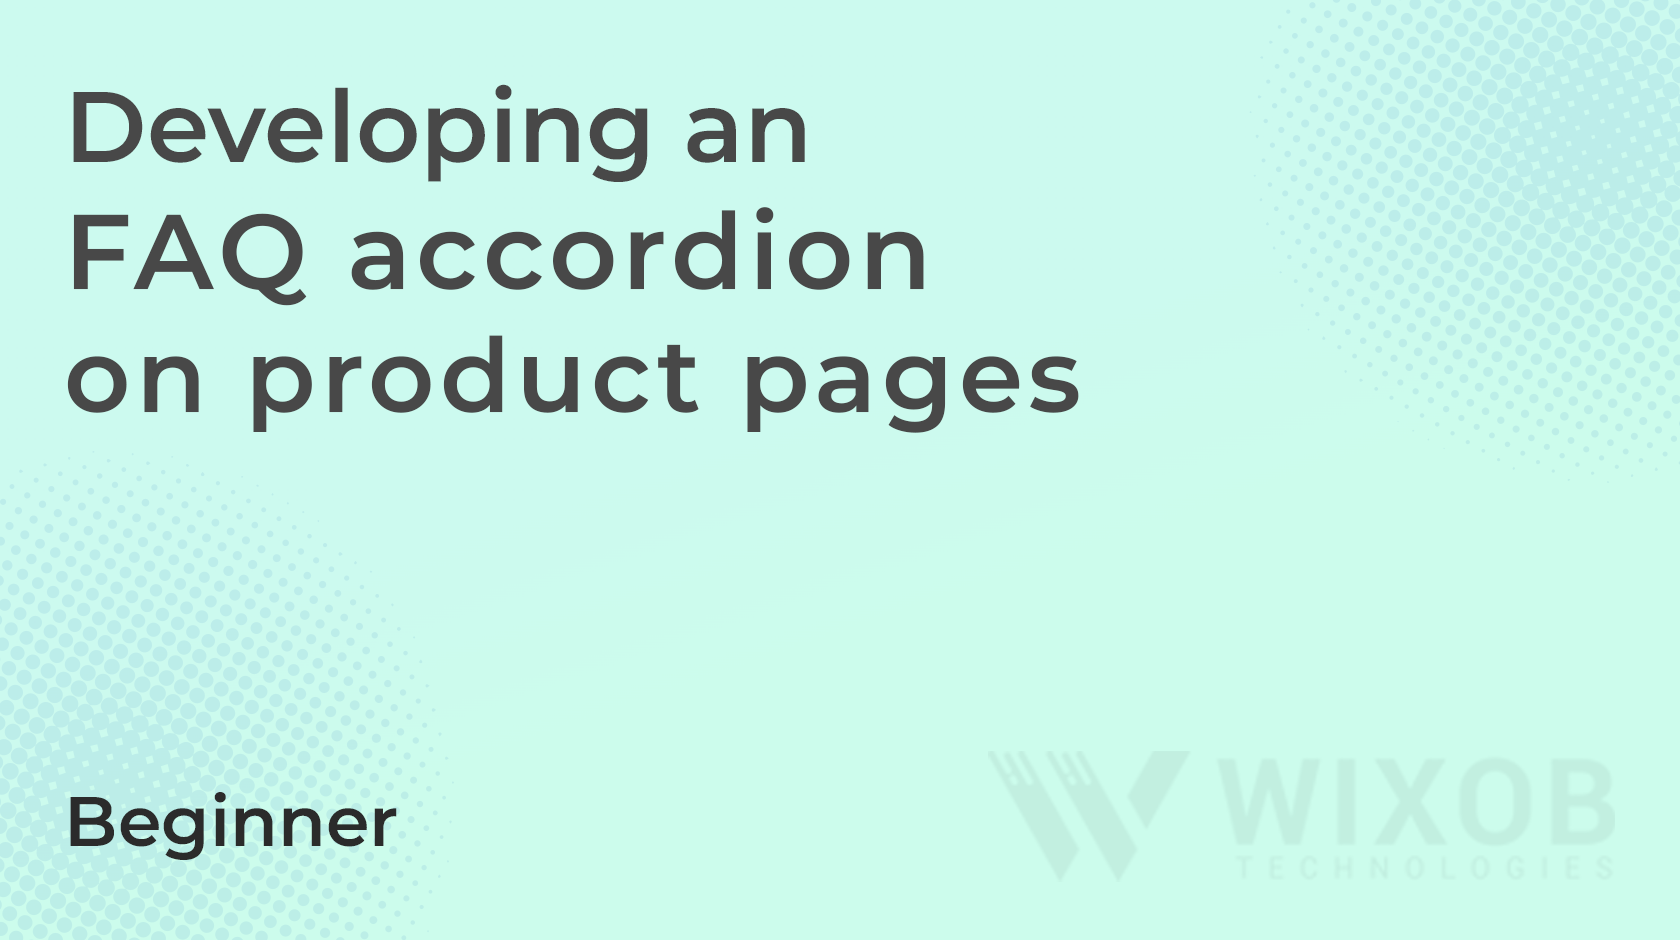 Developing an FAQ accordion on product pages